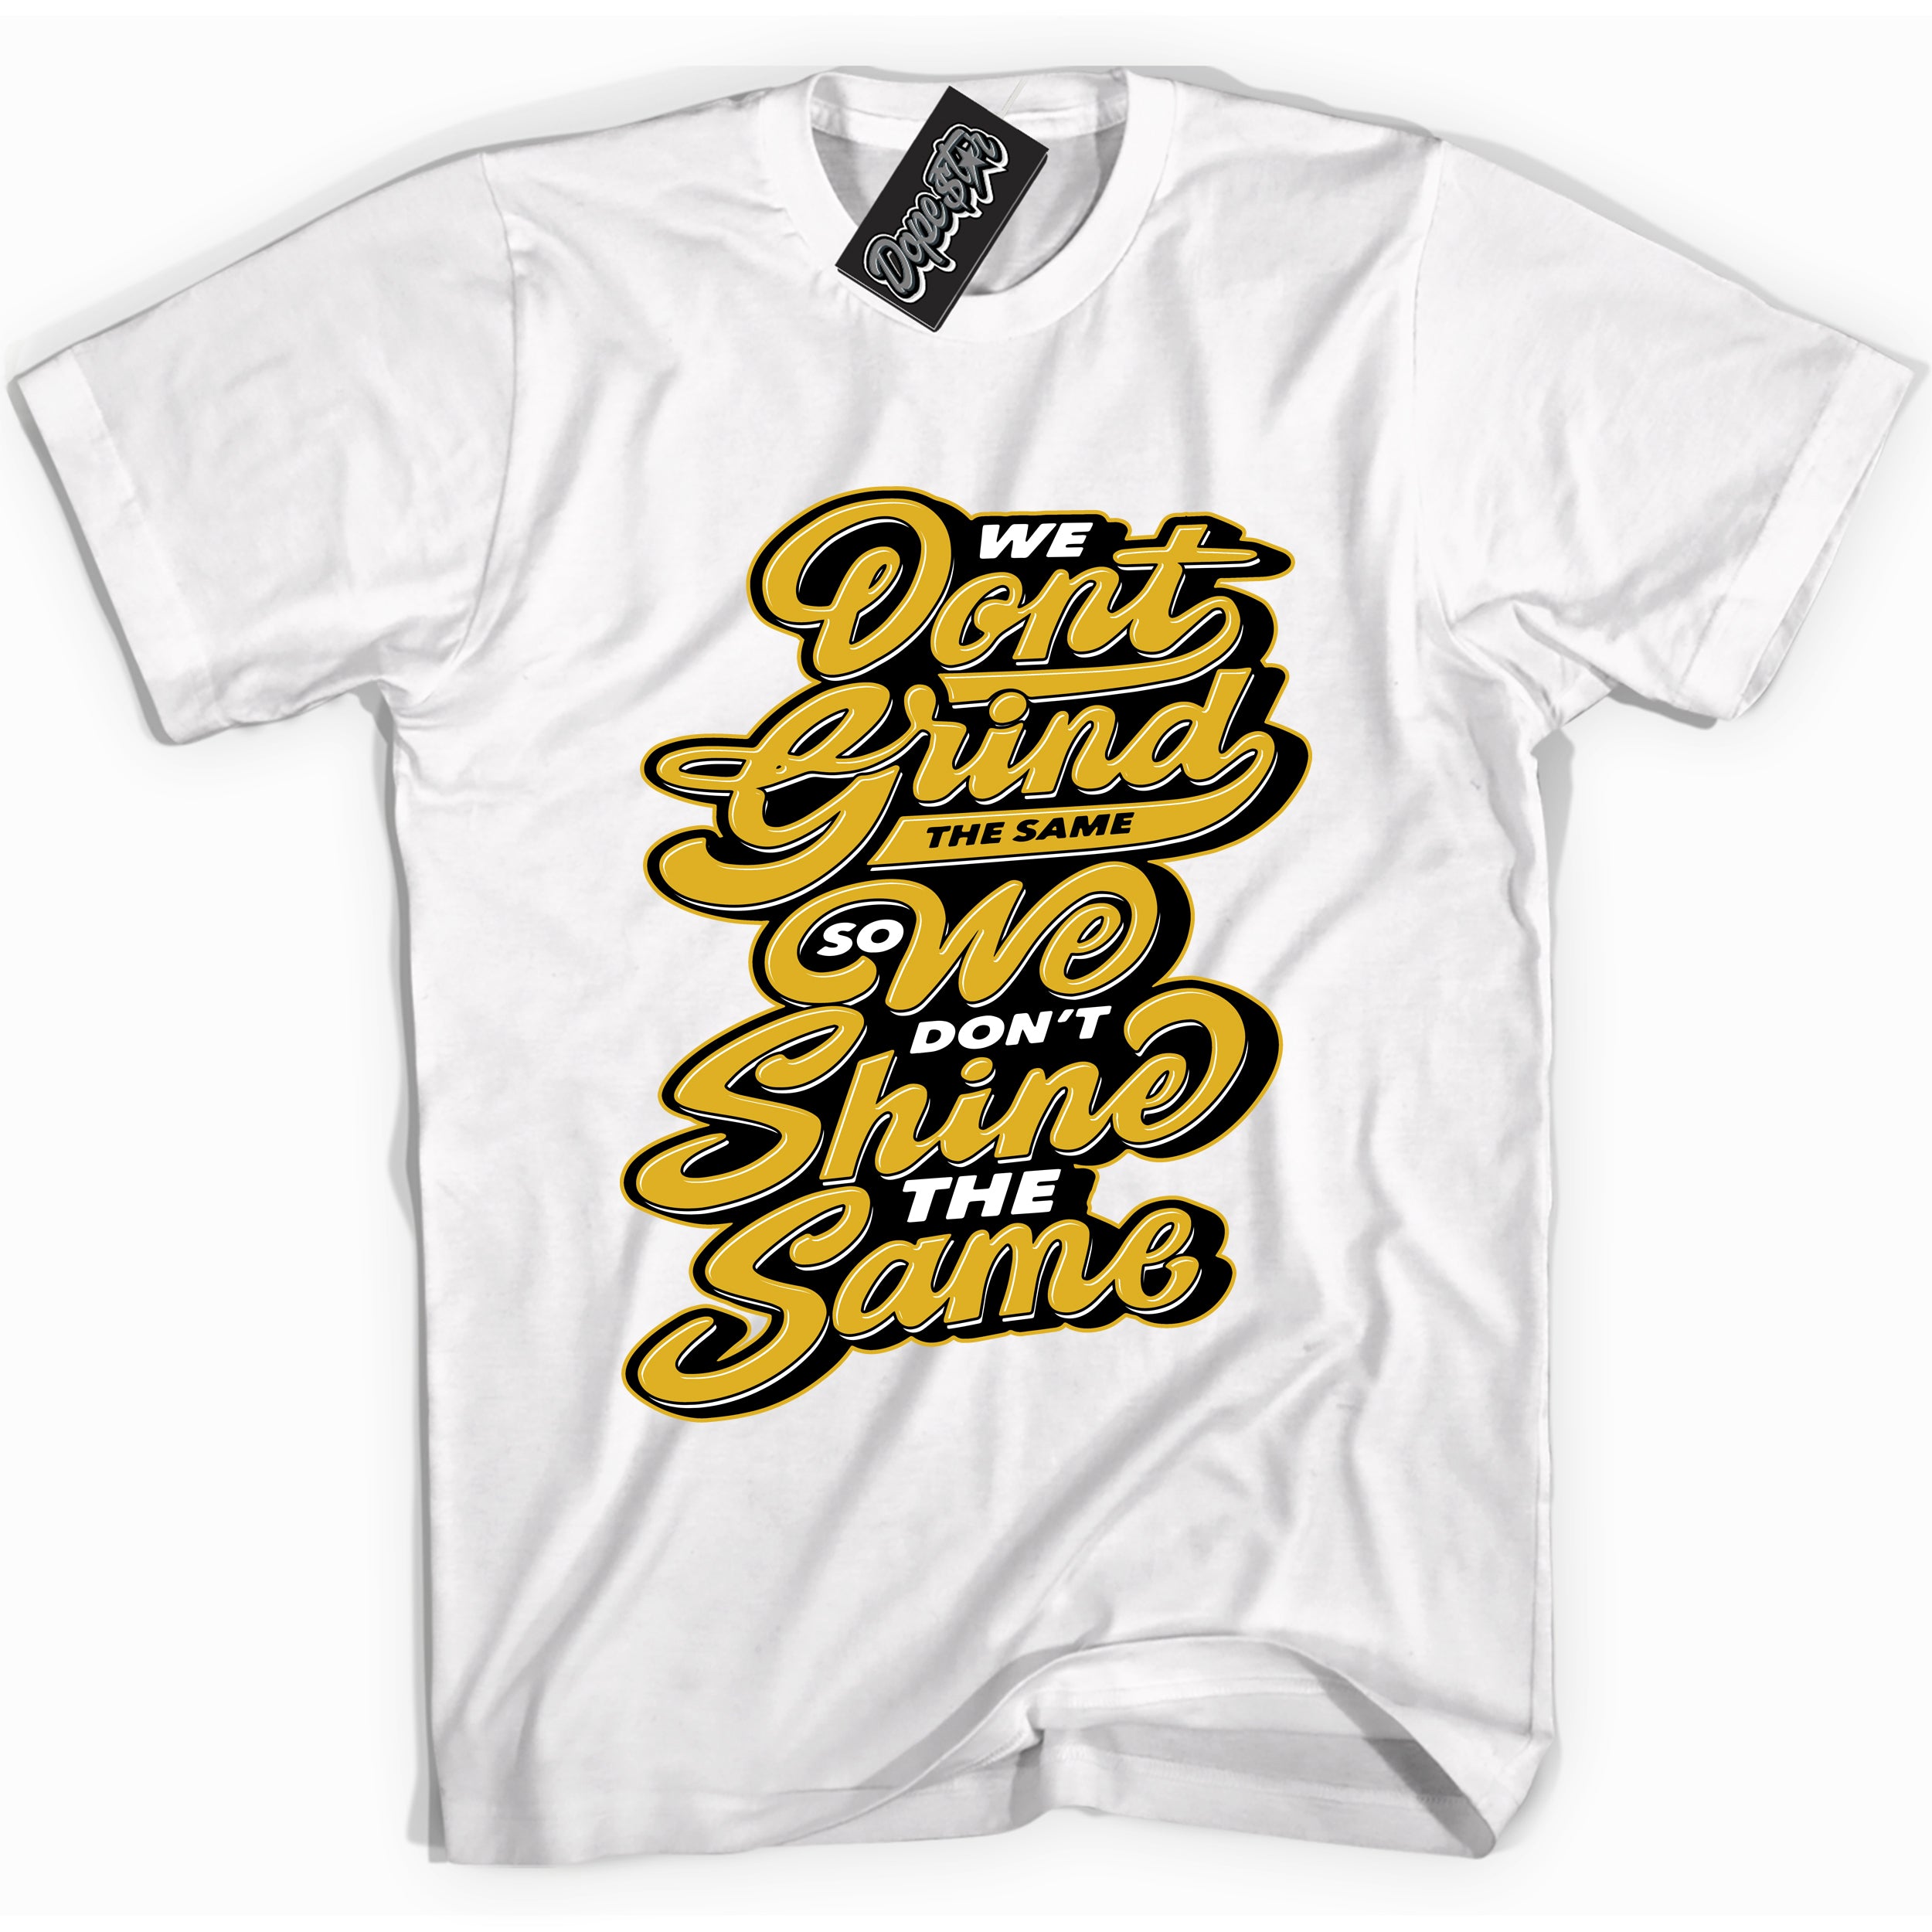 Cool White Shirt with “ Grind Shine” design that perfectly matches Yellow Ochre 6s Sneakers.